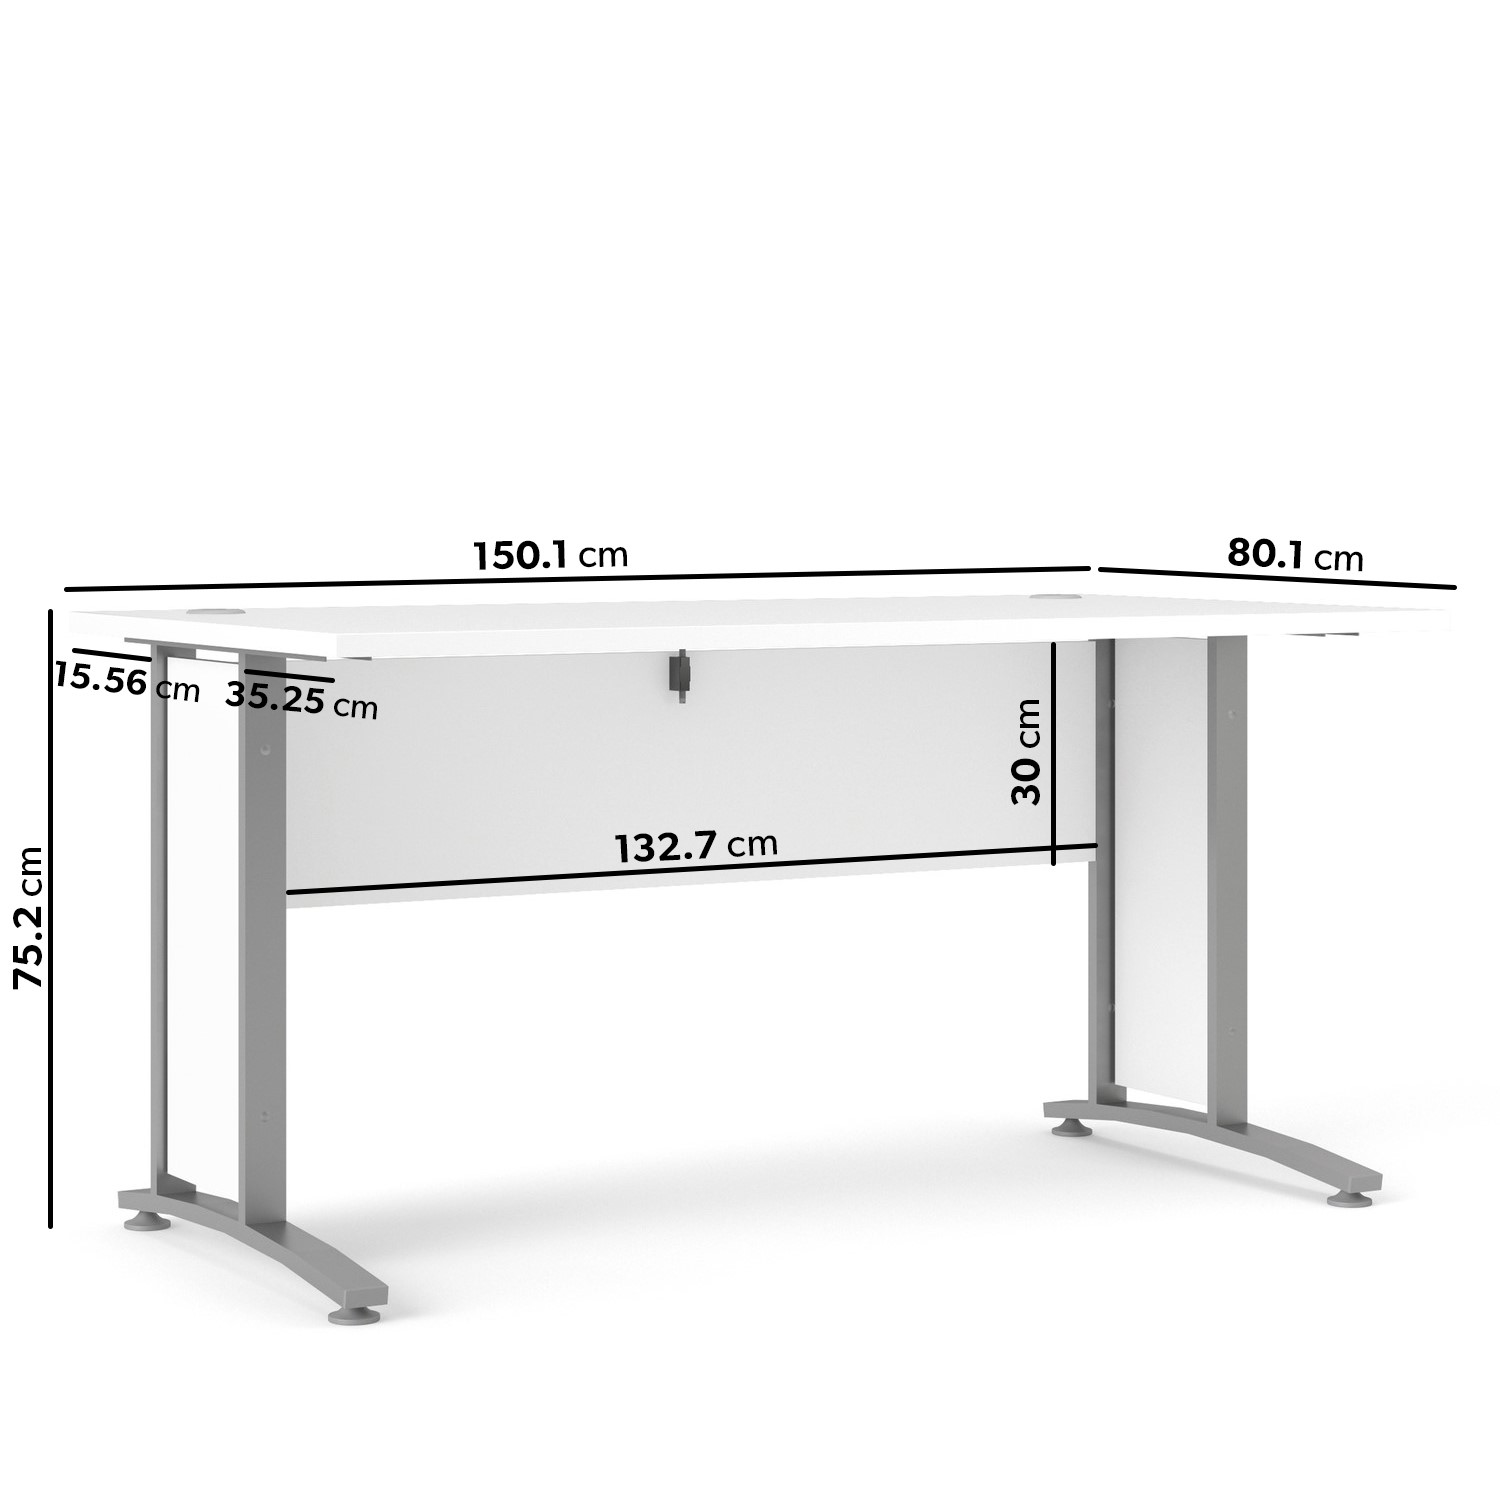 Read more about Large white office desk with metal legs prima